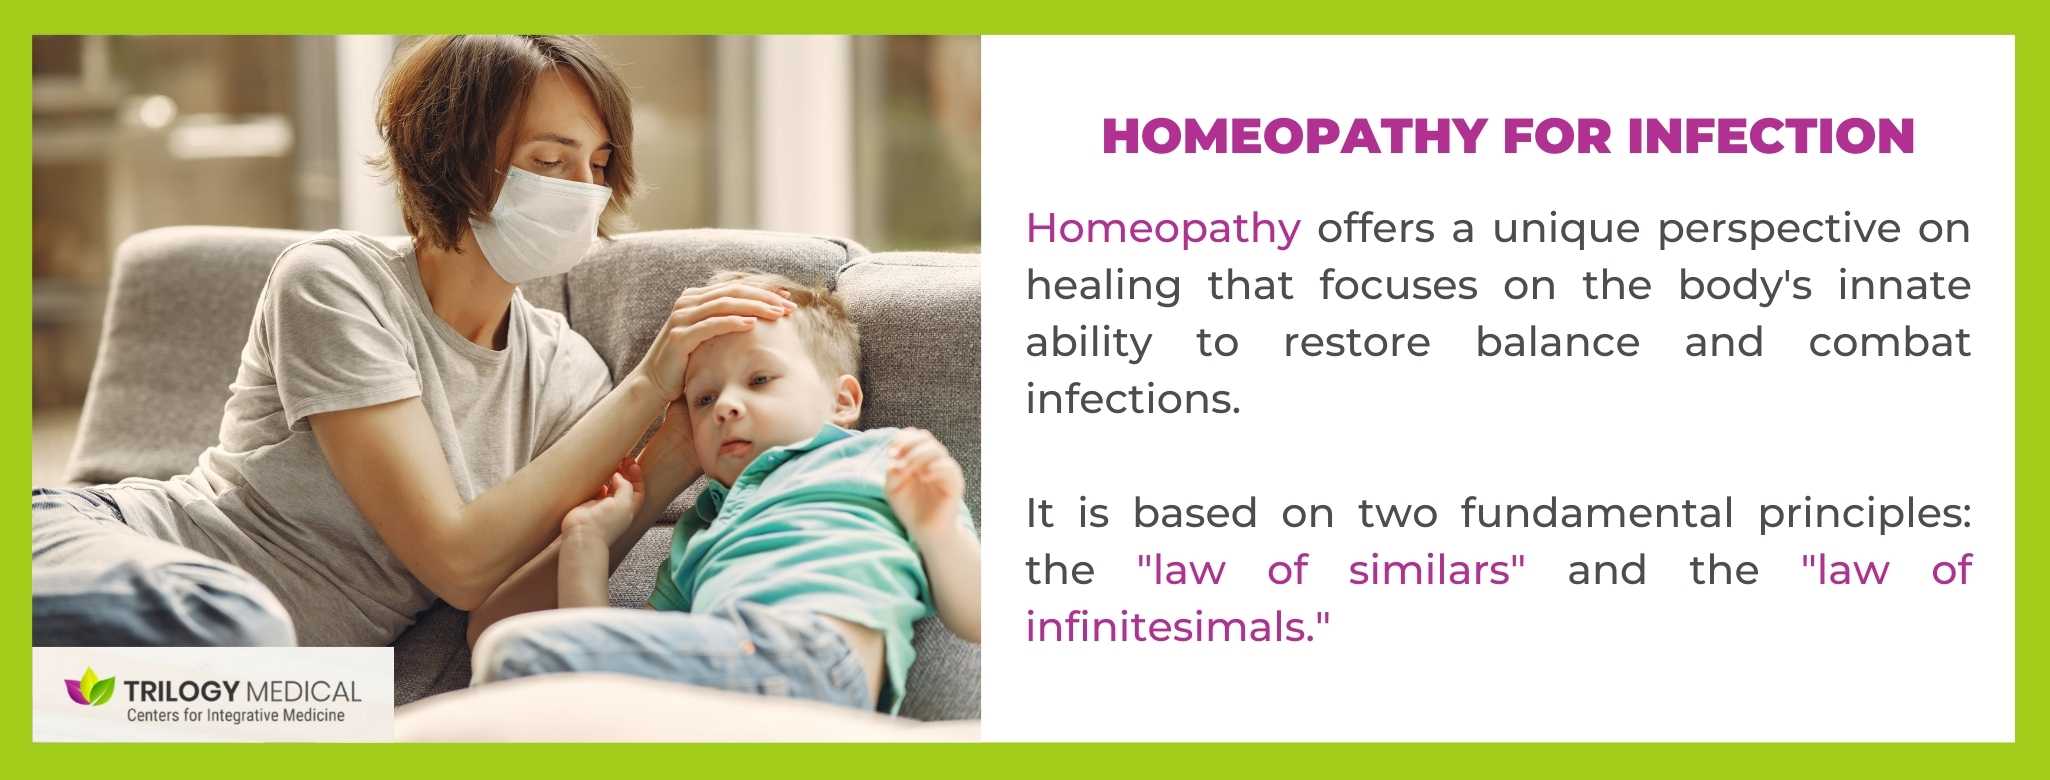 homeopathy for infection